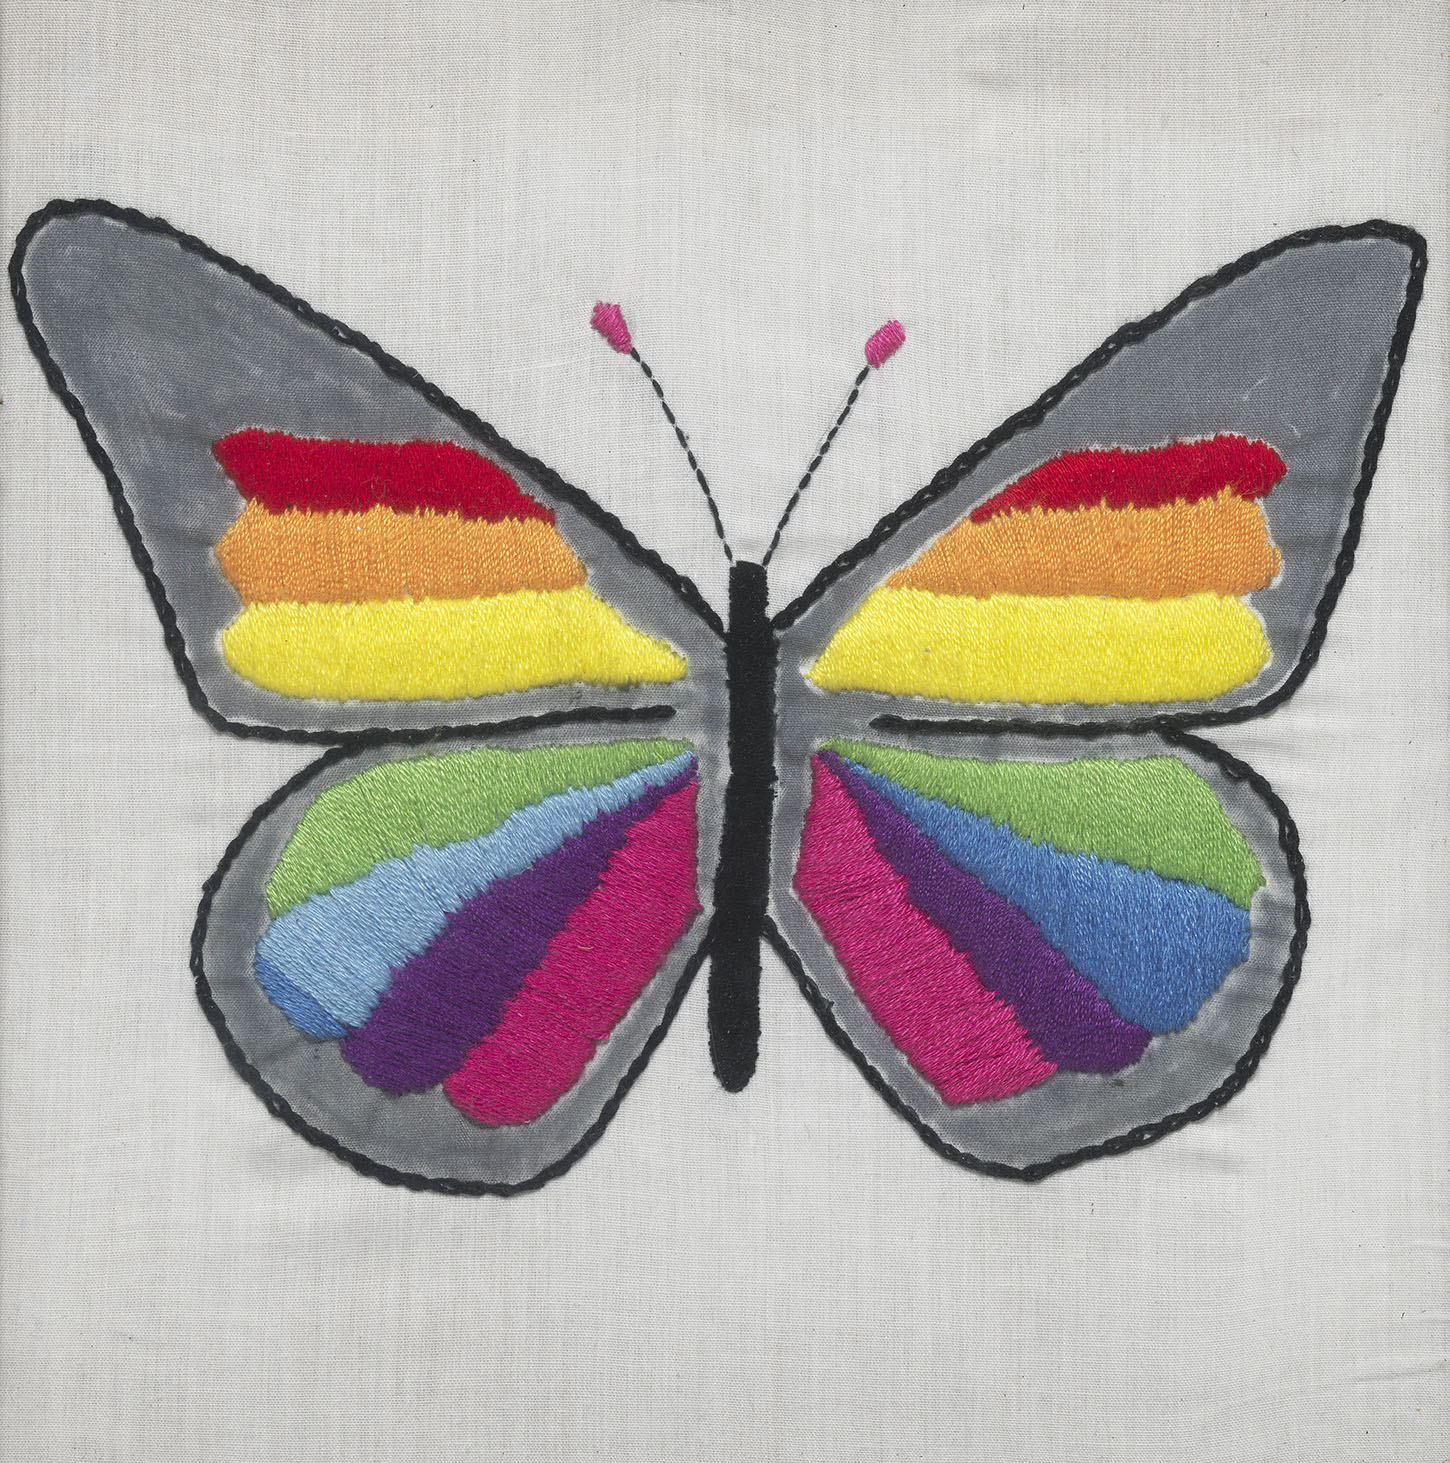 Embroidered butterfly with rainbow-coloured wings